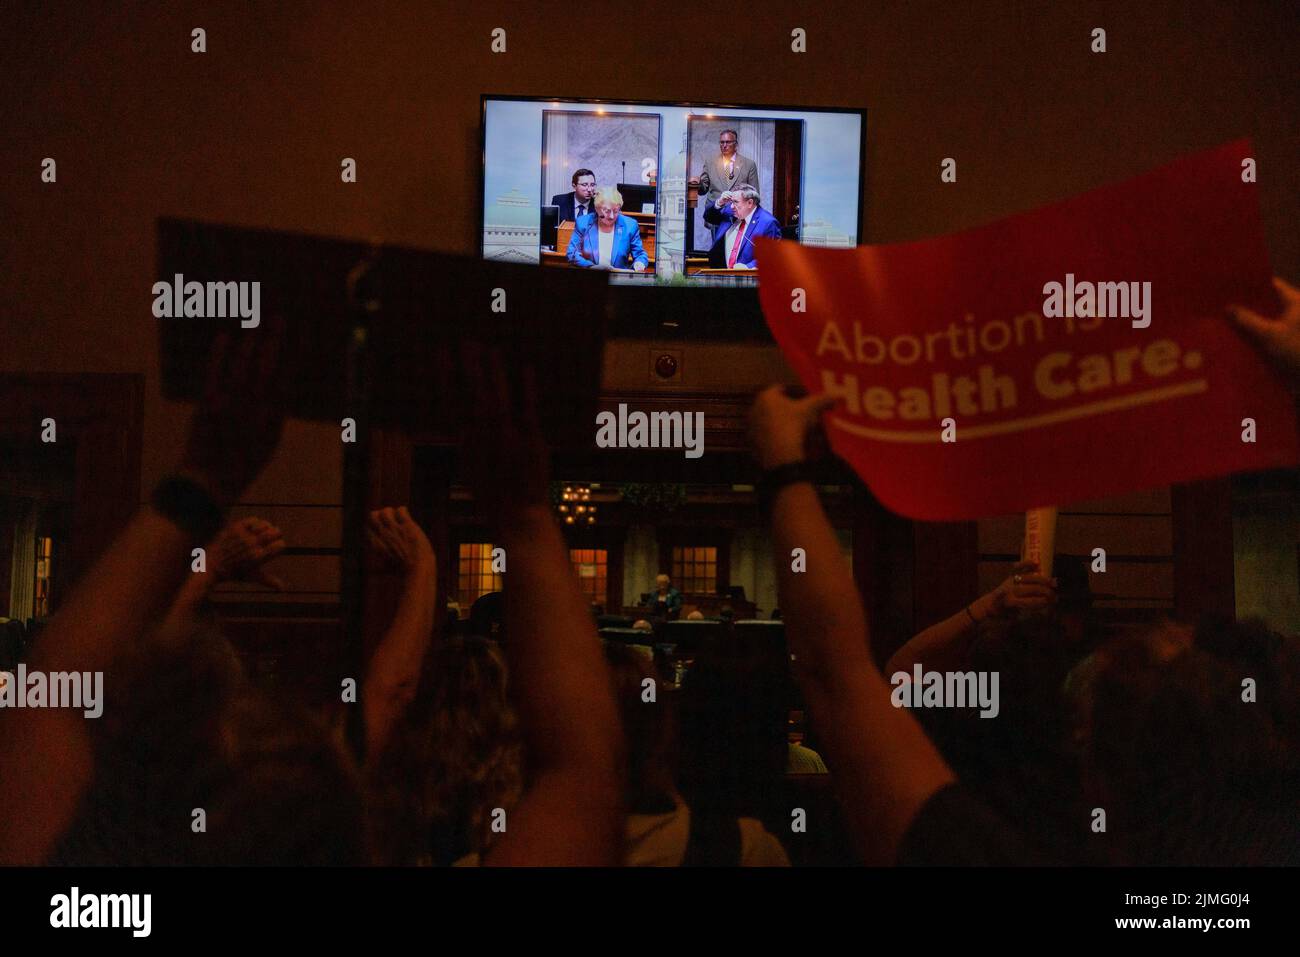 INDIANAPOLIS, INDIANA - AUGUST 5: Indiana Senate debates before voting to ban abortion during a special session on August 5, 2022 in Indianapolis, Indiana. The legislature held a special session to ban abortion rights in the wake of the U.S. Supreme Court ruling overturning Roe v. Wade in June. Stock Photo